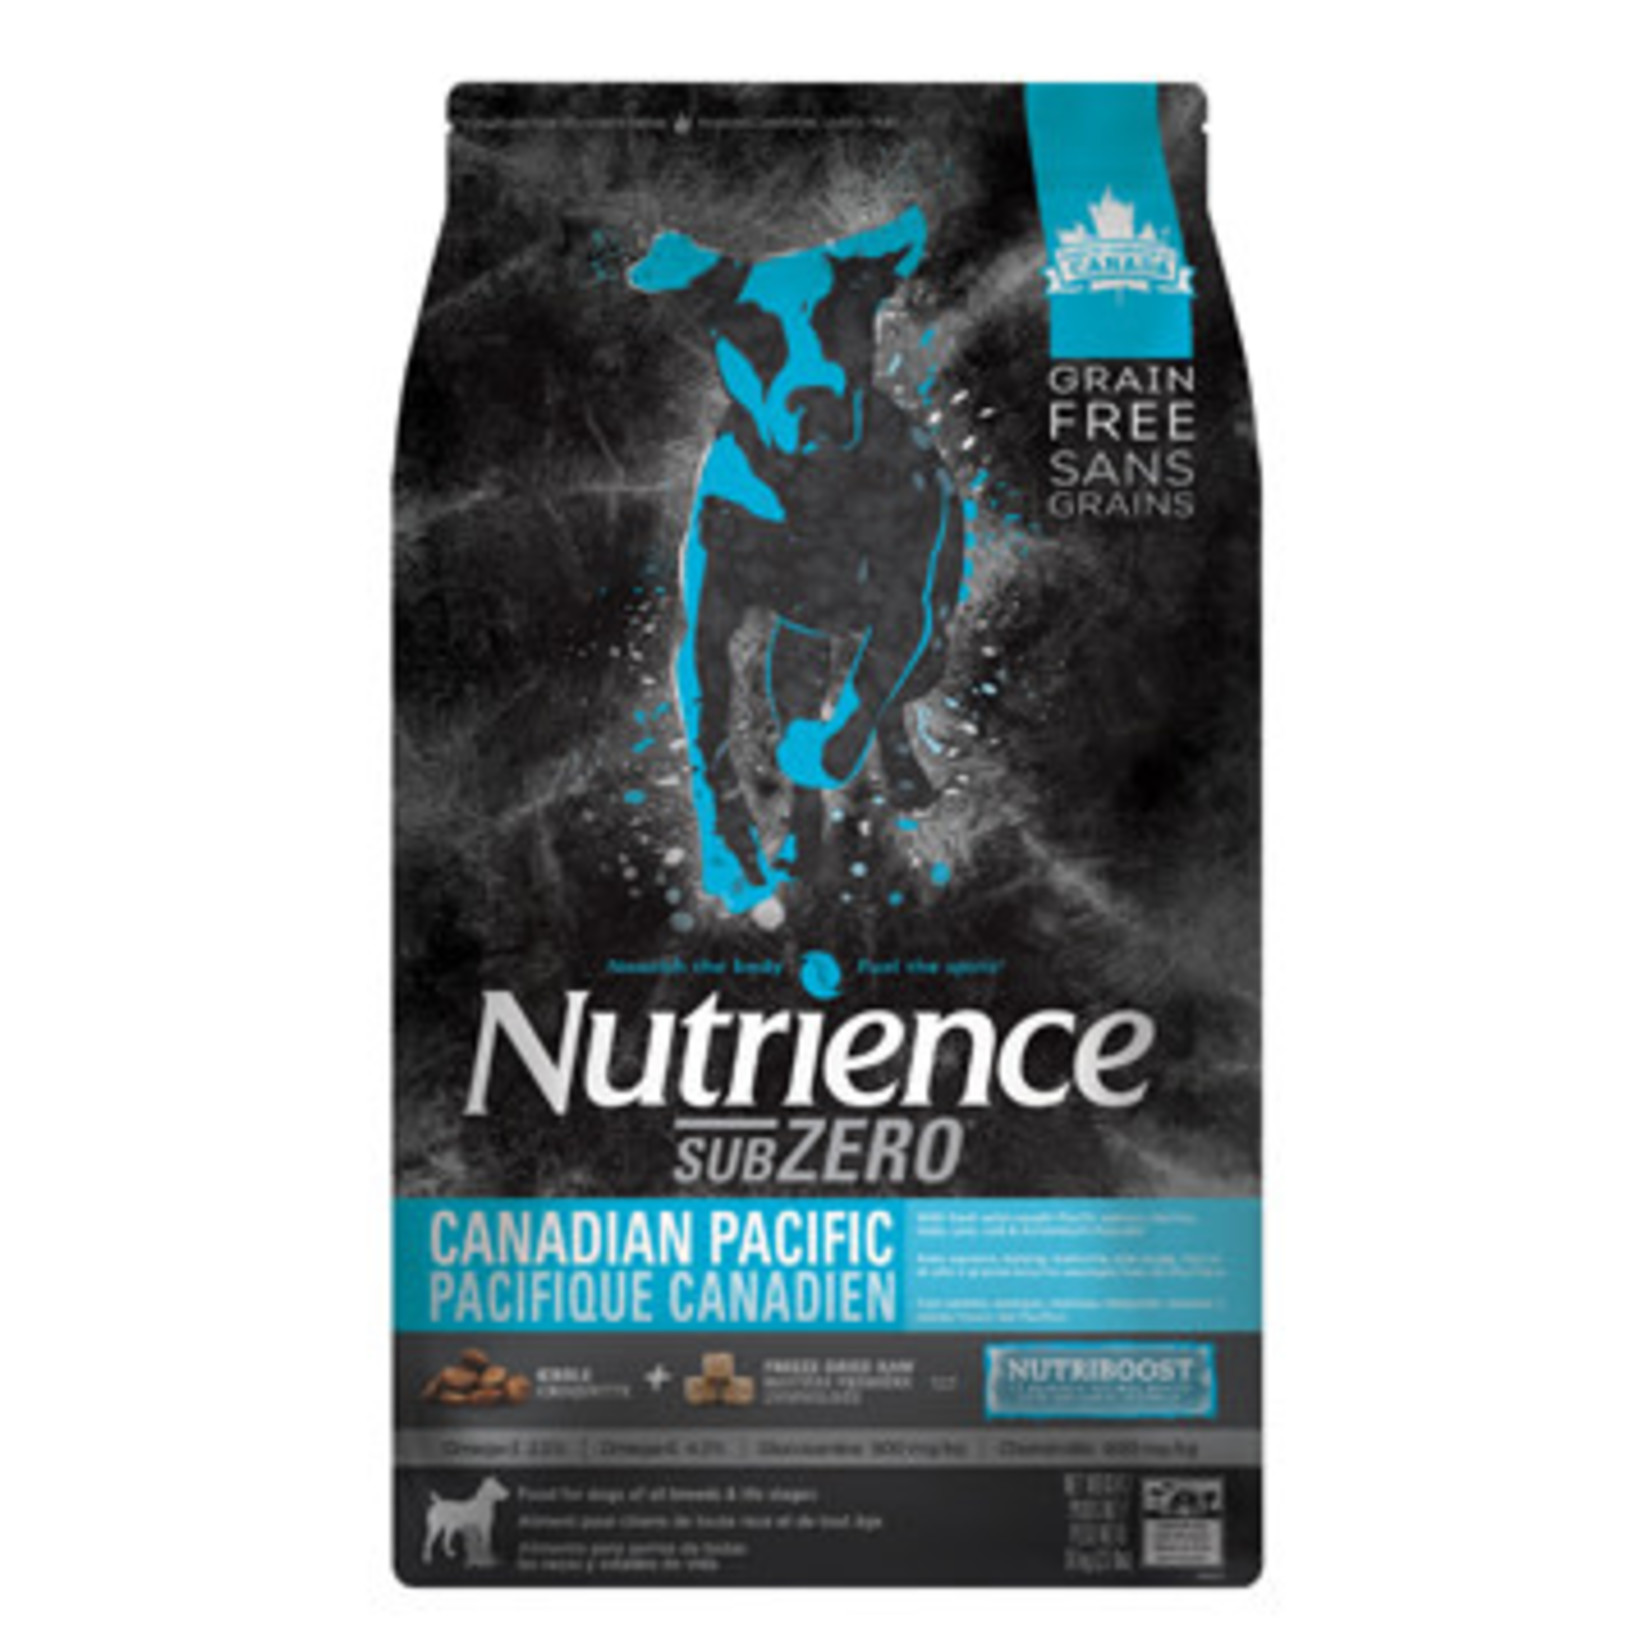 NUTRIENCE Nutrience Grain Free Subzero for Dogs - Canadian Pacific - 10 kg (22 lbs)